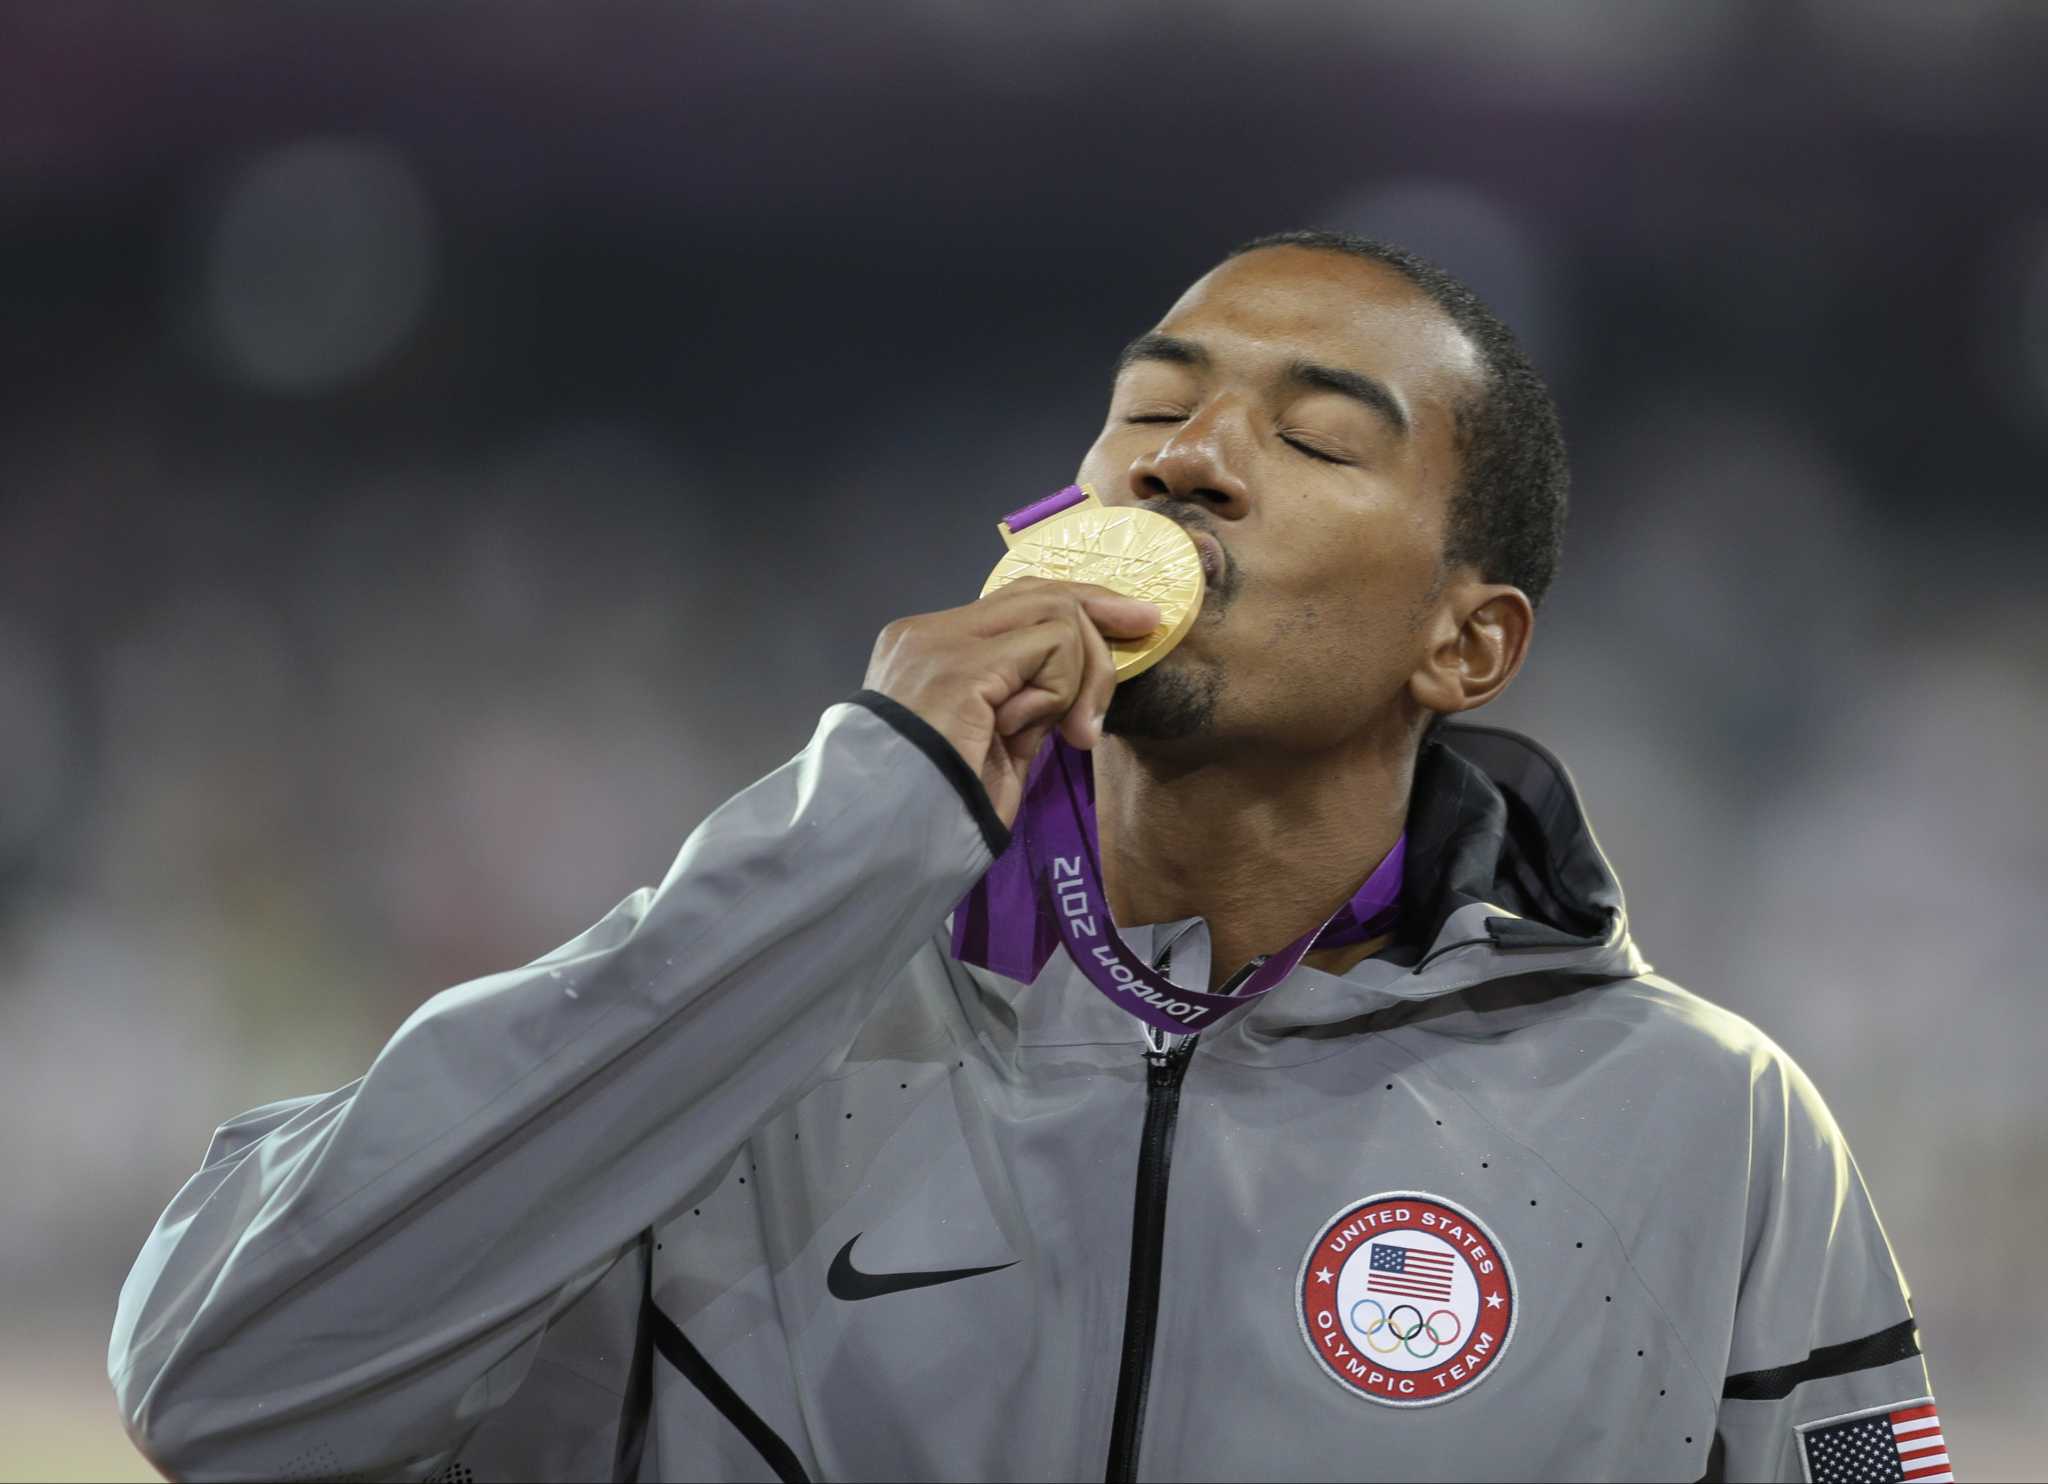 2-time Olympic triple jump champion Christian Taylor will soon spring into retirement